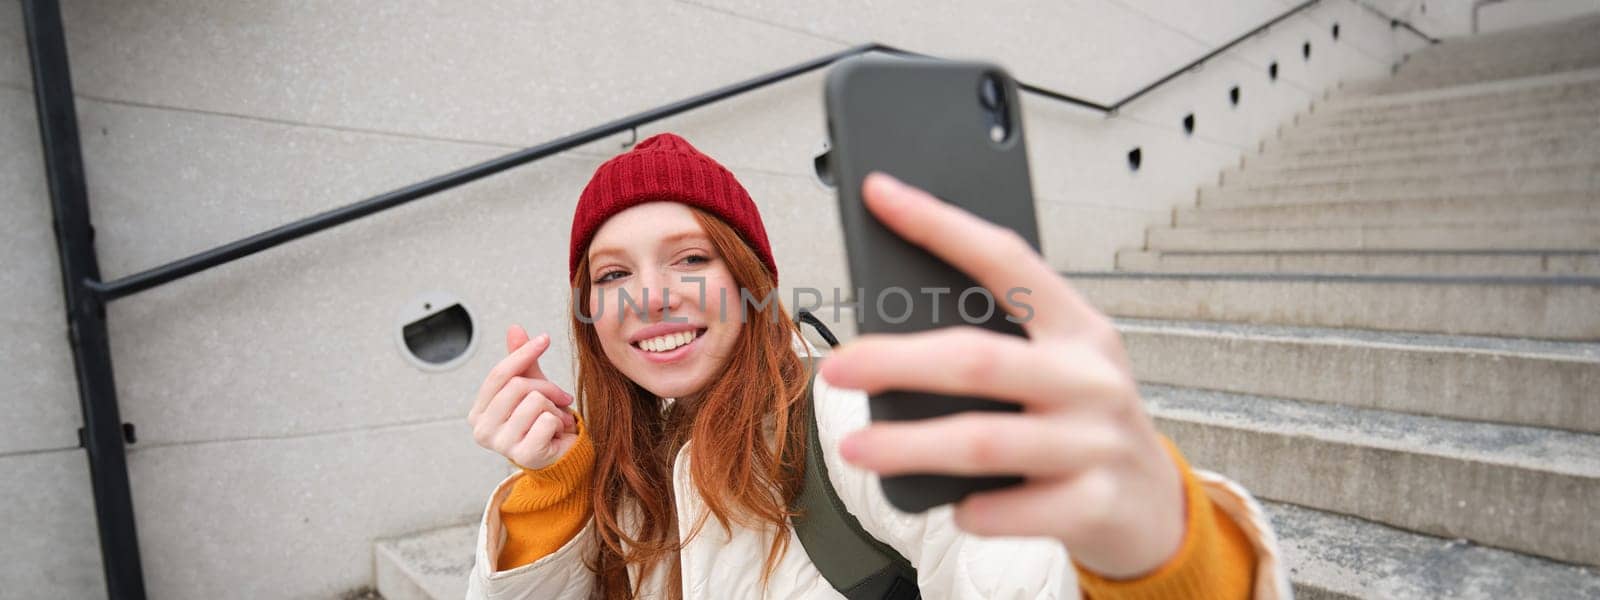 Mobile phone and people lifestyle. Stylish redhead girl takes selfie on her smartphone, poses for photo with mobile phone in hand, smiles happily, sits on stairs outdoors.